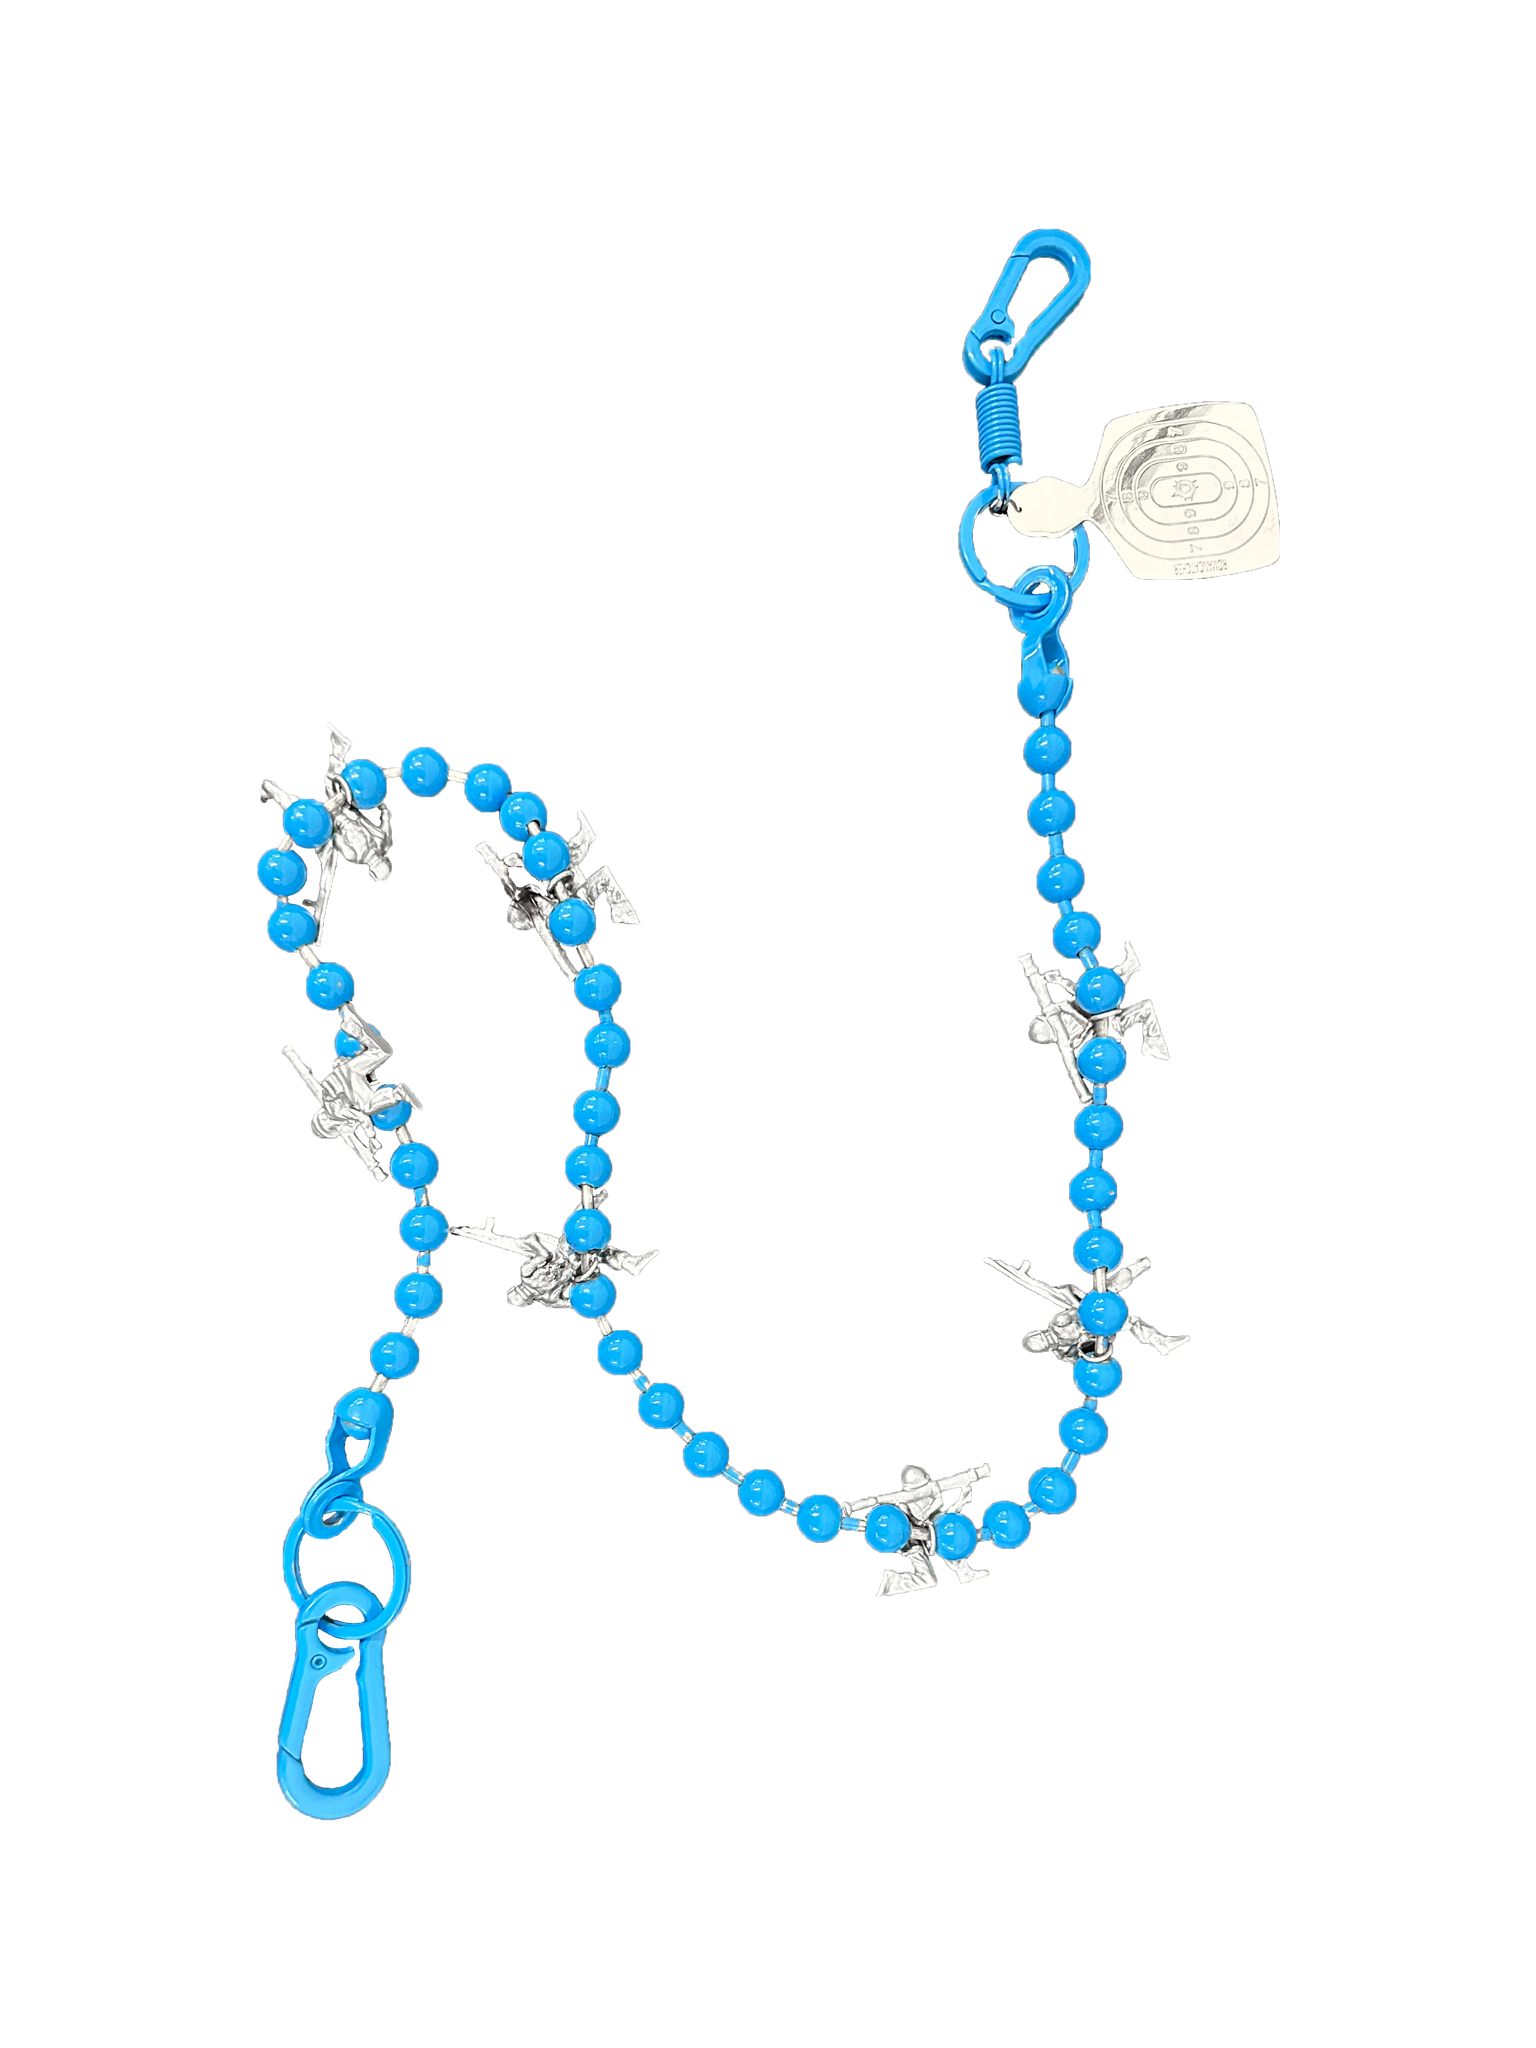 Army Safety Chain (Blue)